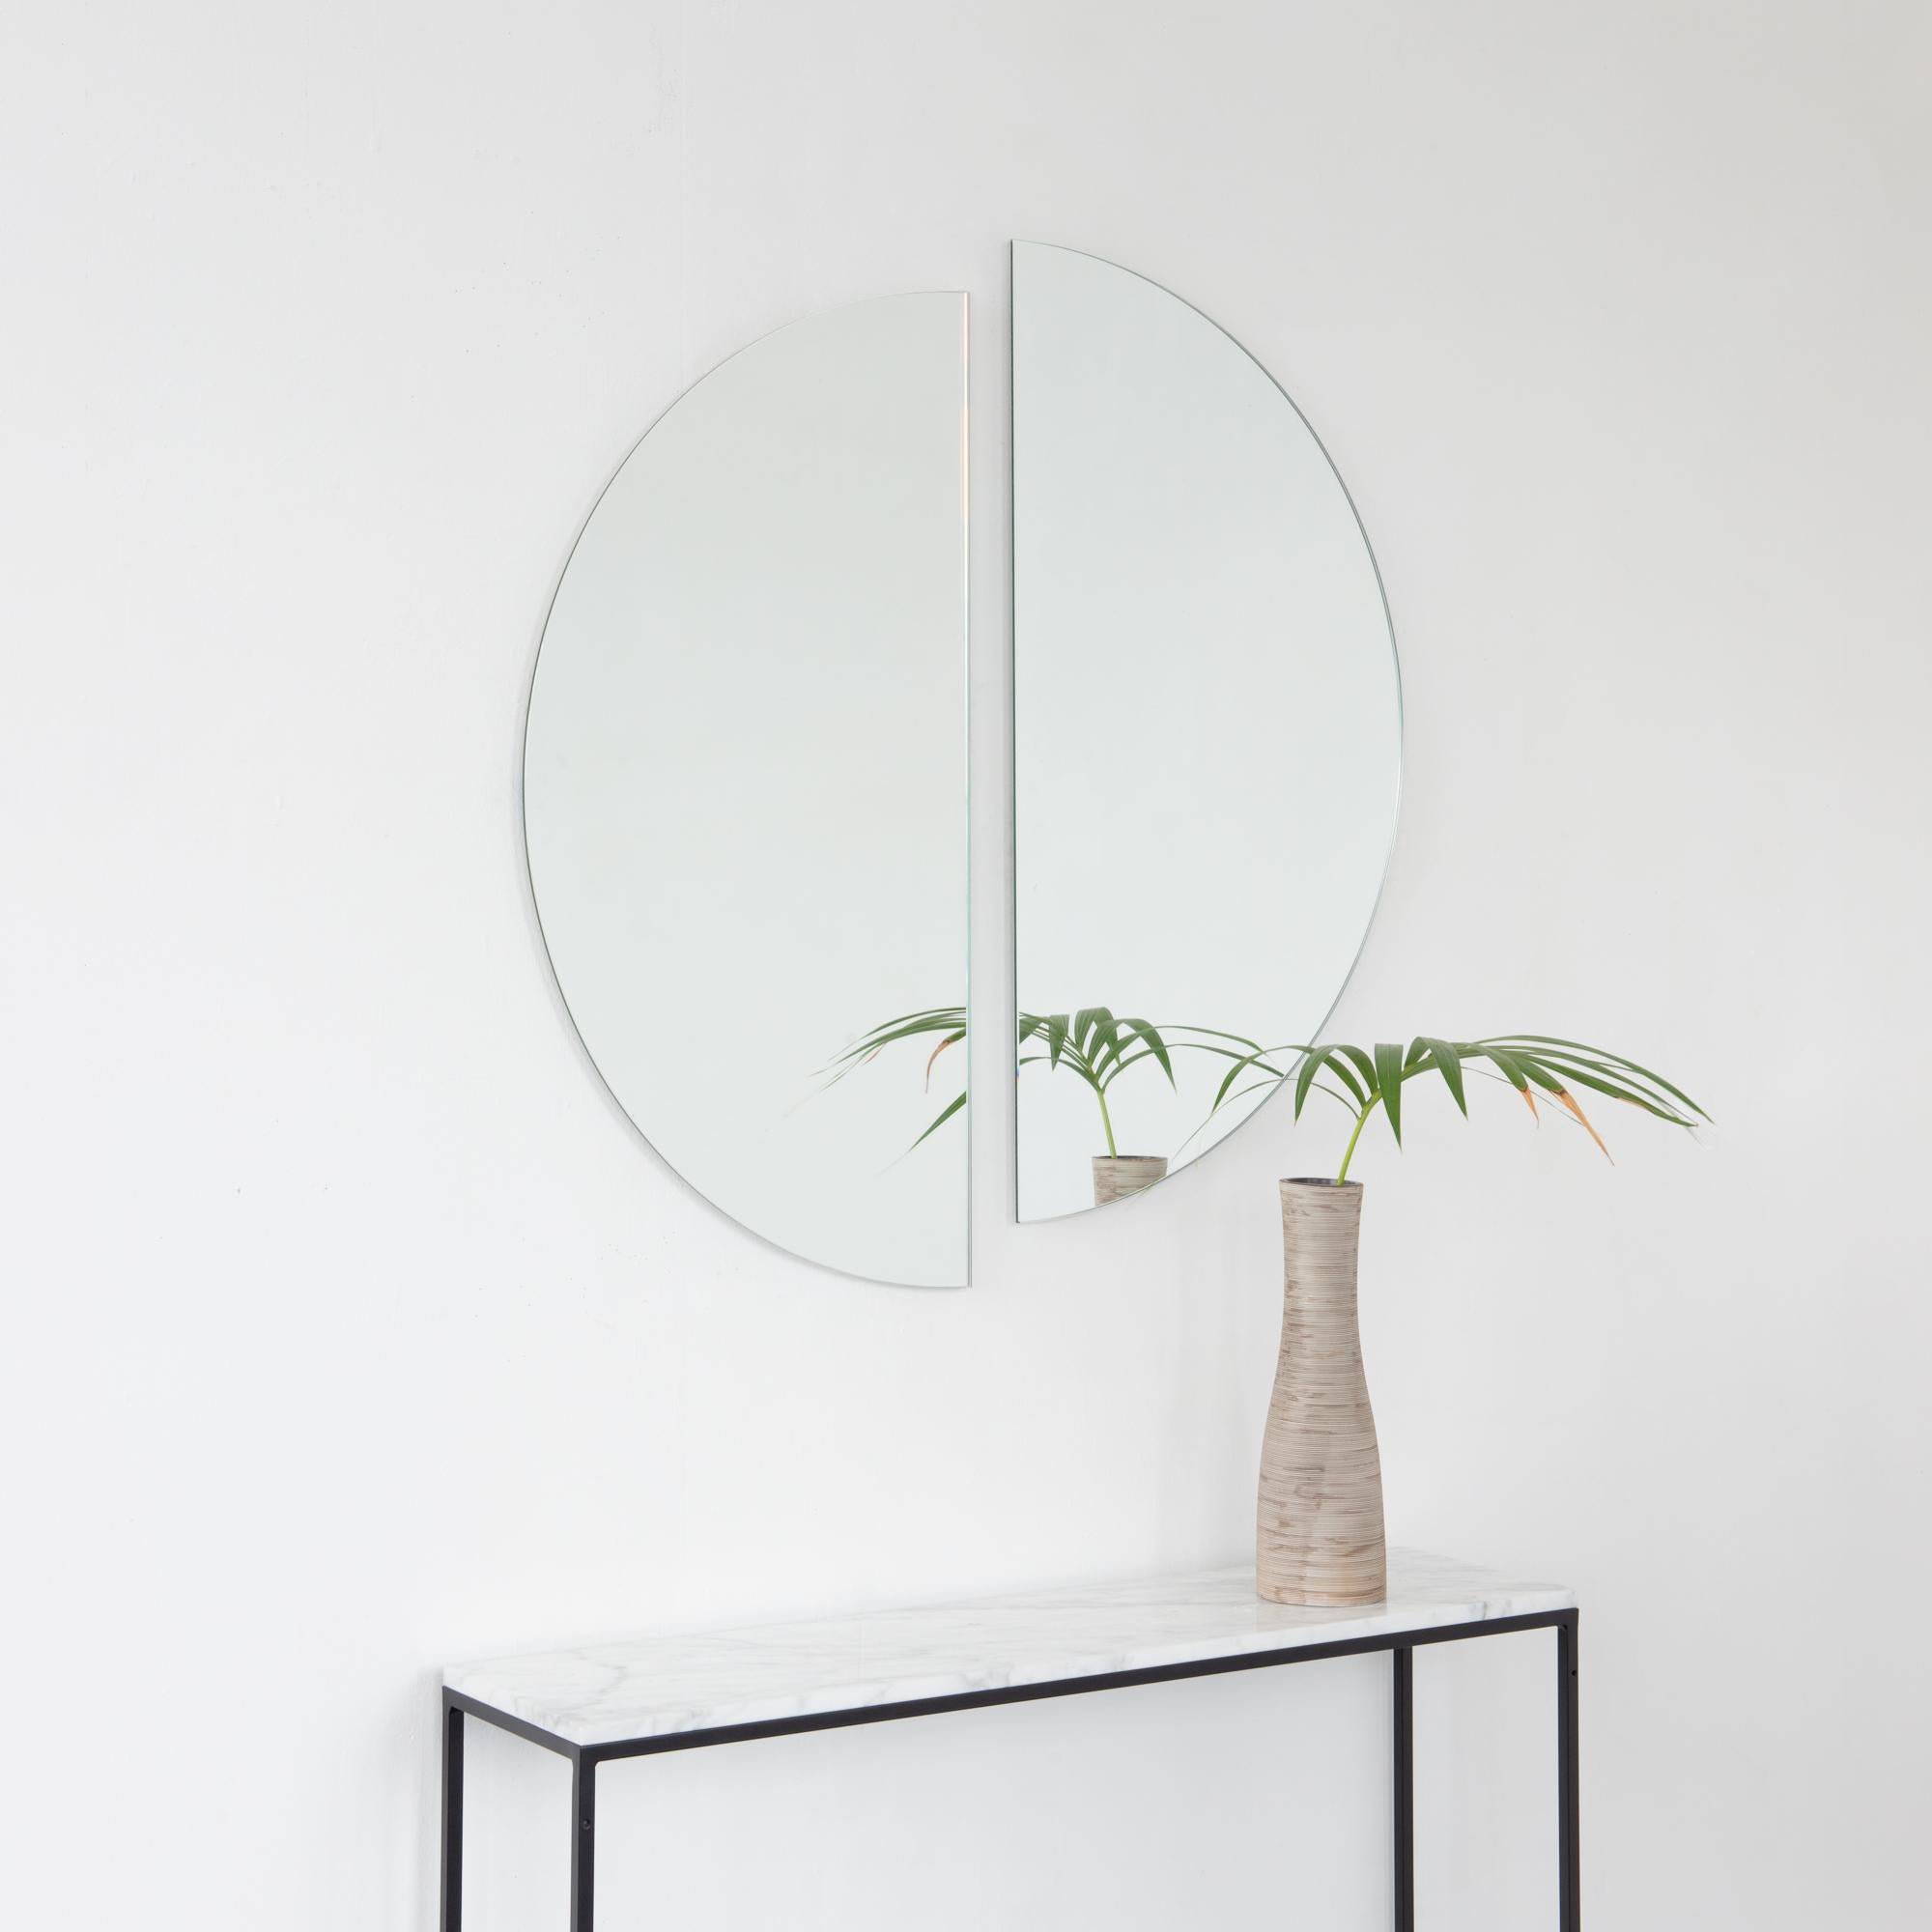 Set of two charming and minimalist Luna™ half-moon frameless mirrors with a floating effect. Fitted with a quality and ingenious hanging system for a flexible installation in 4 different directions. Designed and made in London, UK.

The backing has